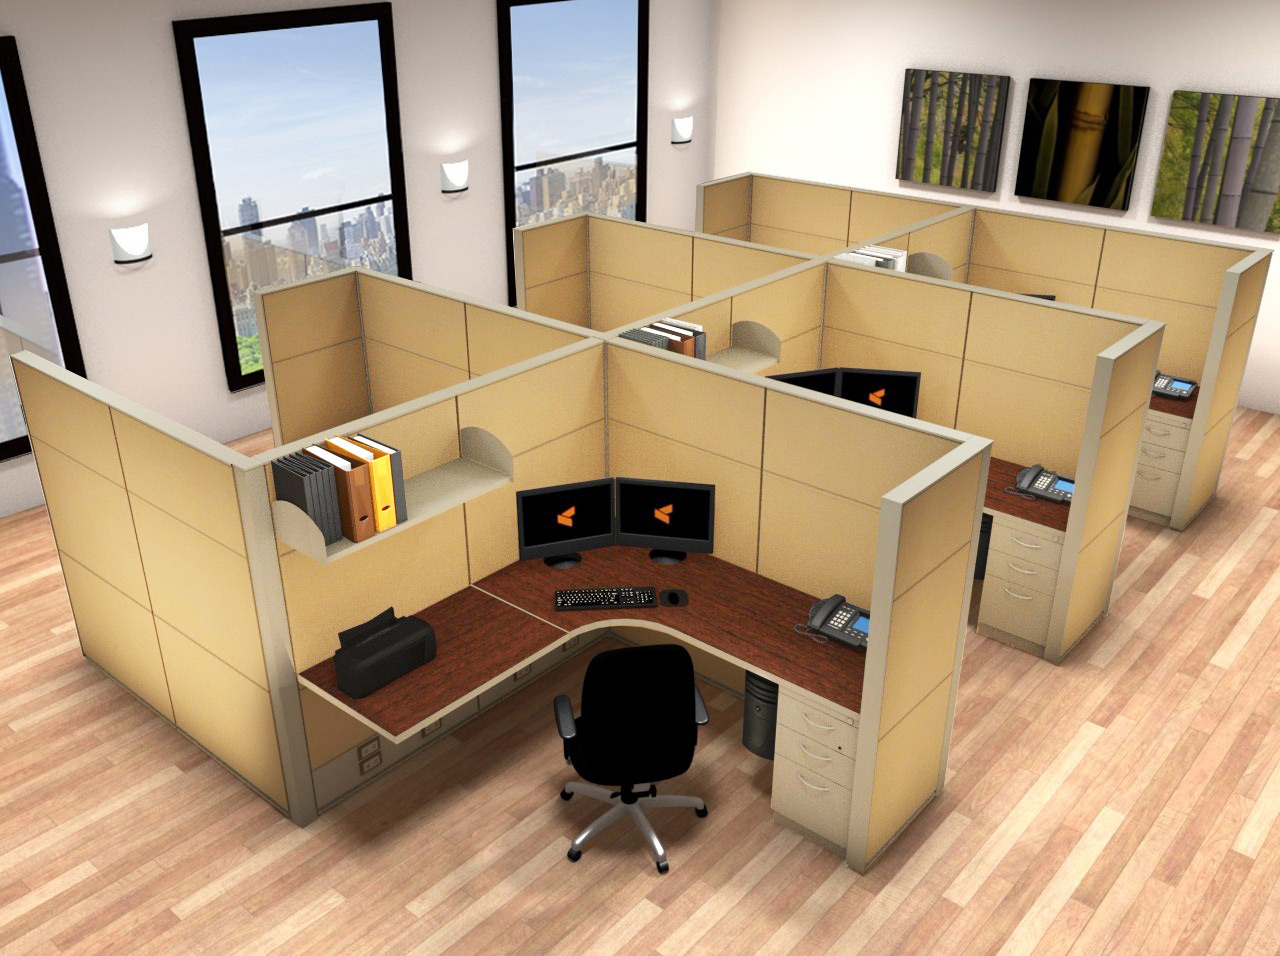 Cubicle Workstation - 6x6 Cubicle Workstations - Cubicle Systems